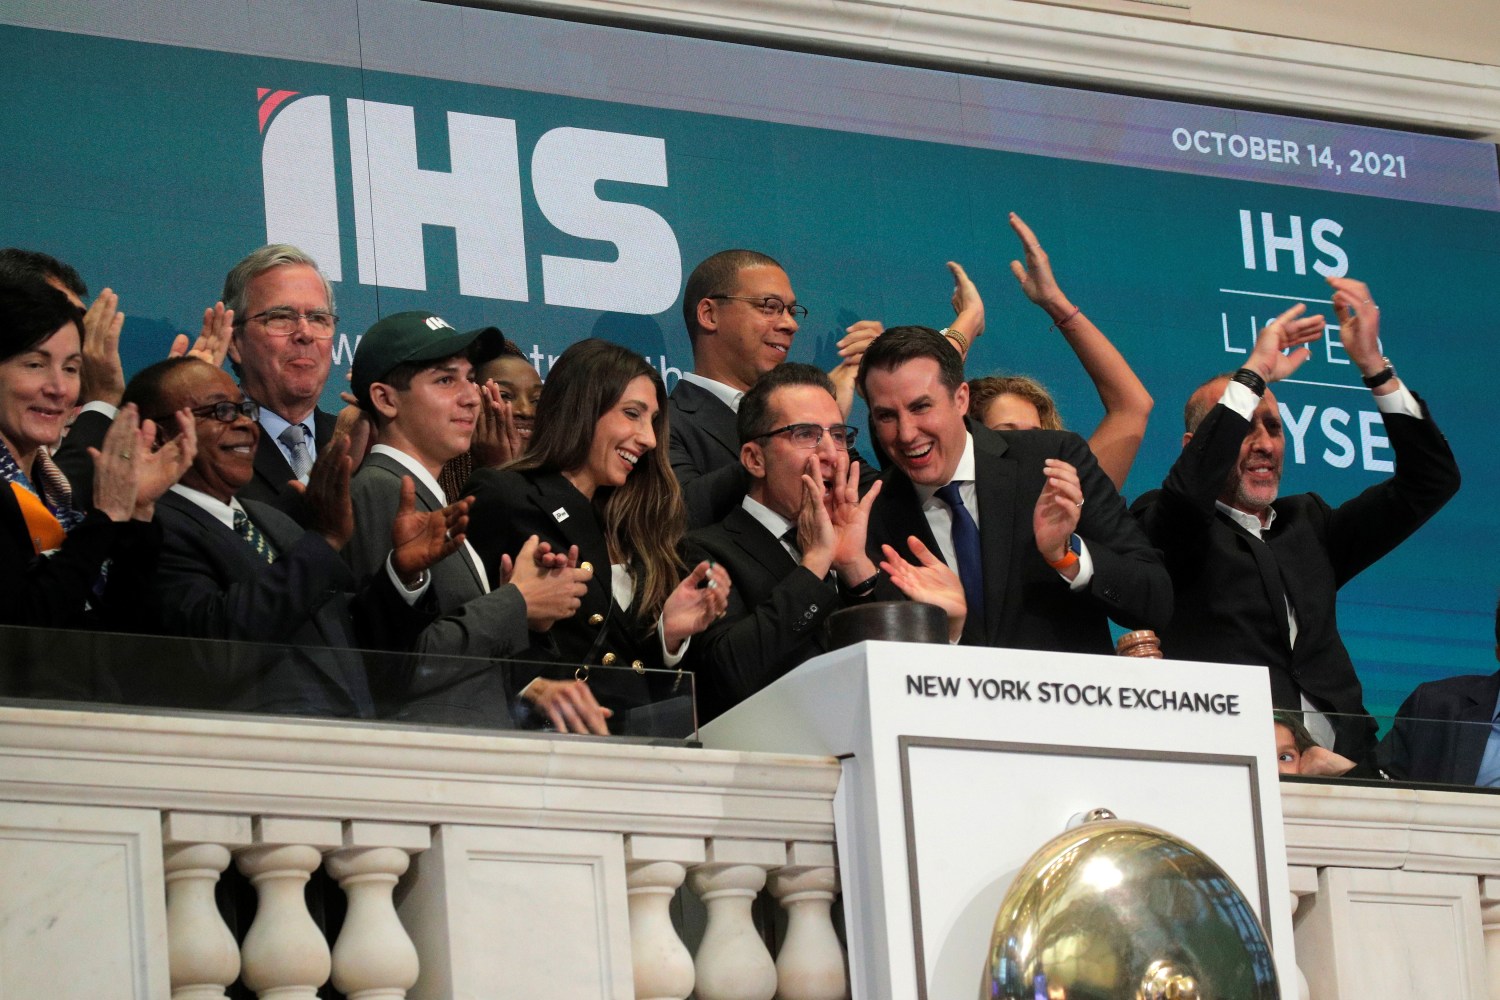 Sam Darwish, Chairman & CEO of IHS Holding Ltd, rings the opening bell to celebrate his company’s IPO at the New York Stock Exchange (NYSE) in New York City, U.S., October 14, 2021.  REUTERS/Brendan McDermid